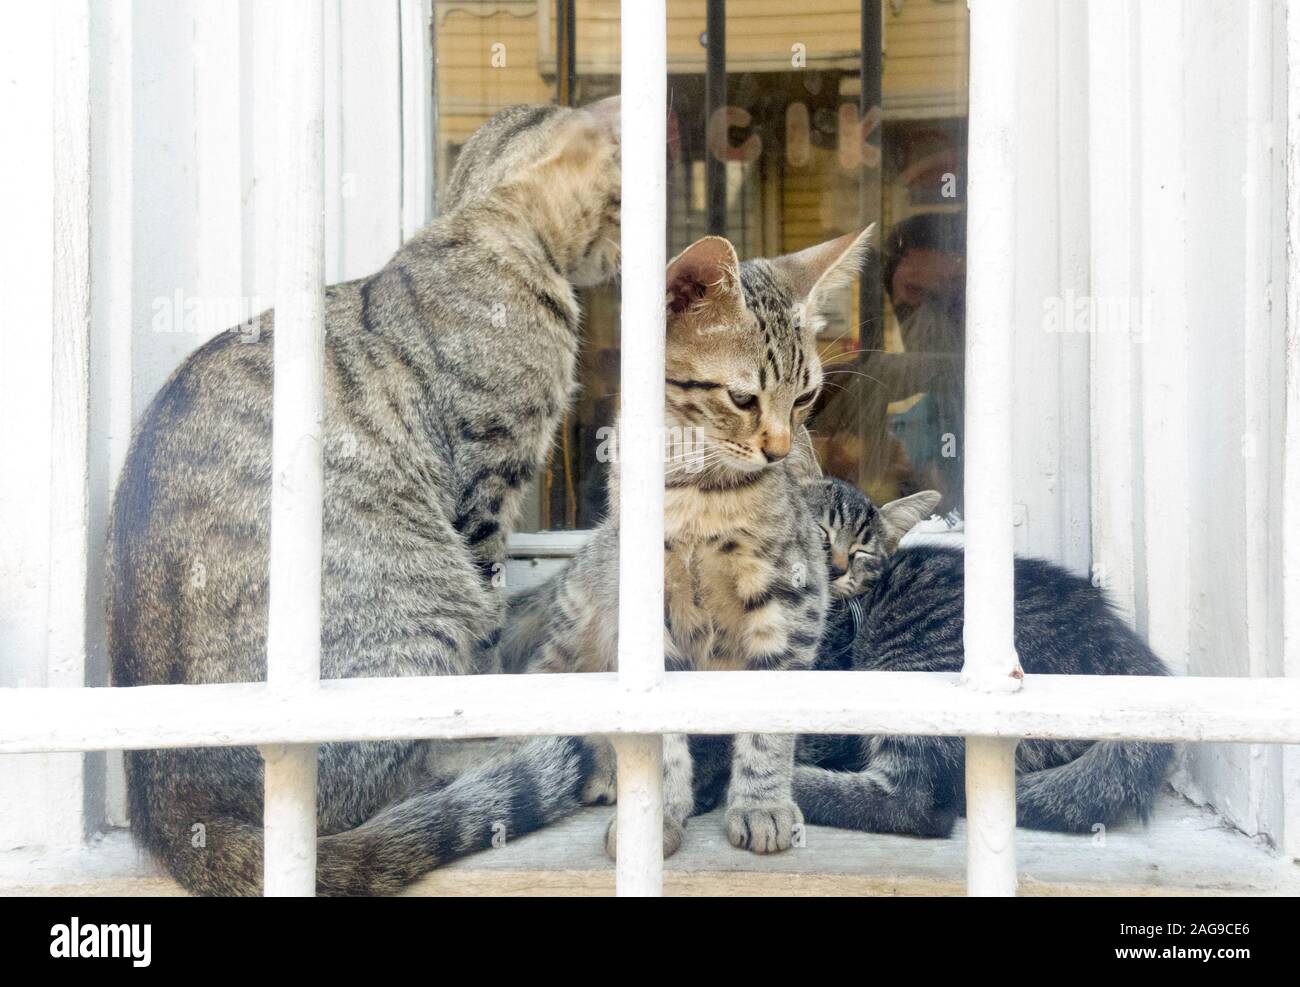 Eye level portrait of a tabby mother cat and two kids inside a window niche outdoors, behind white iron bars. Stock Photo